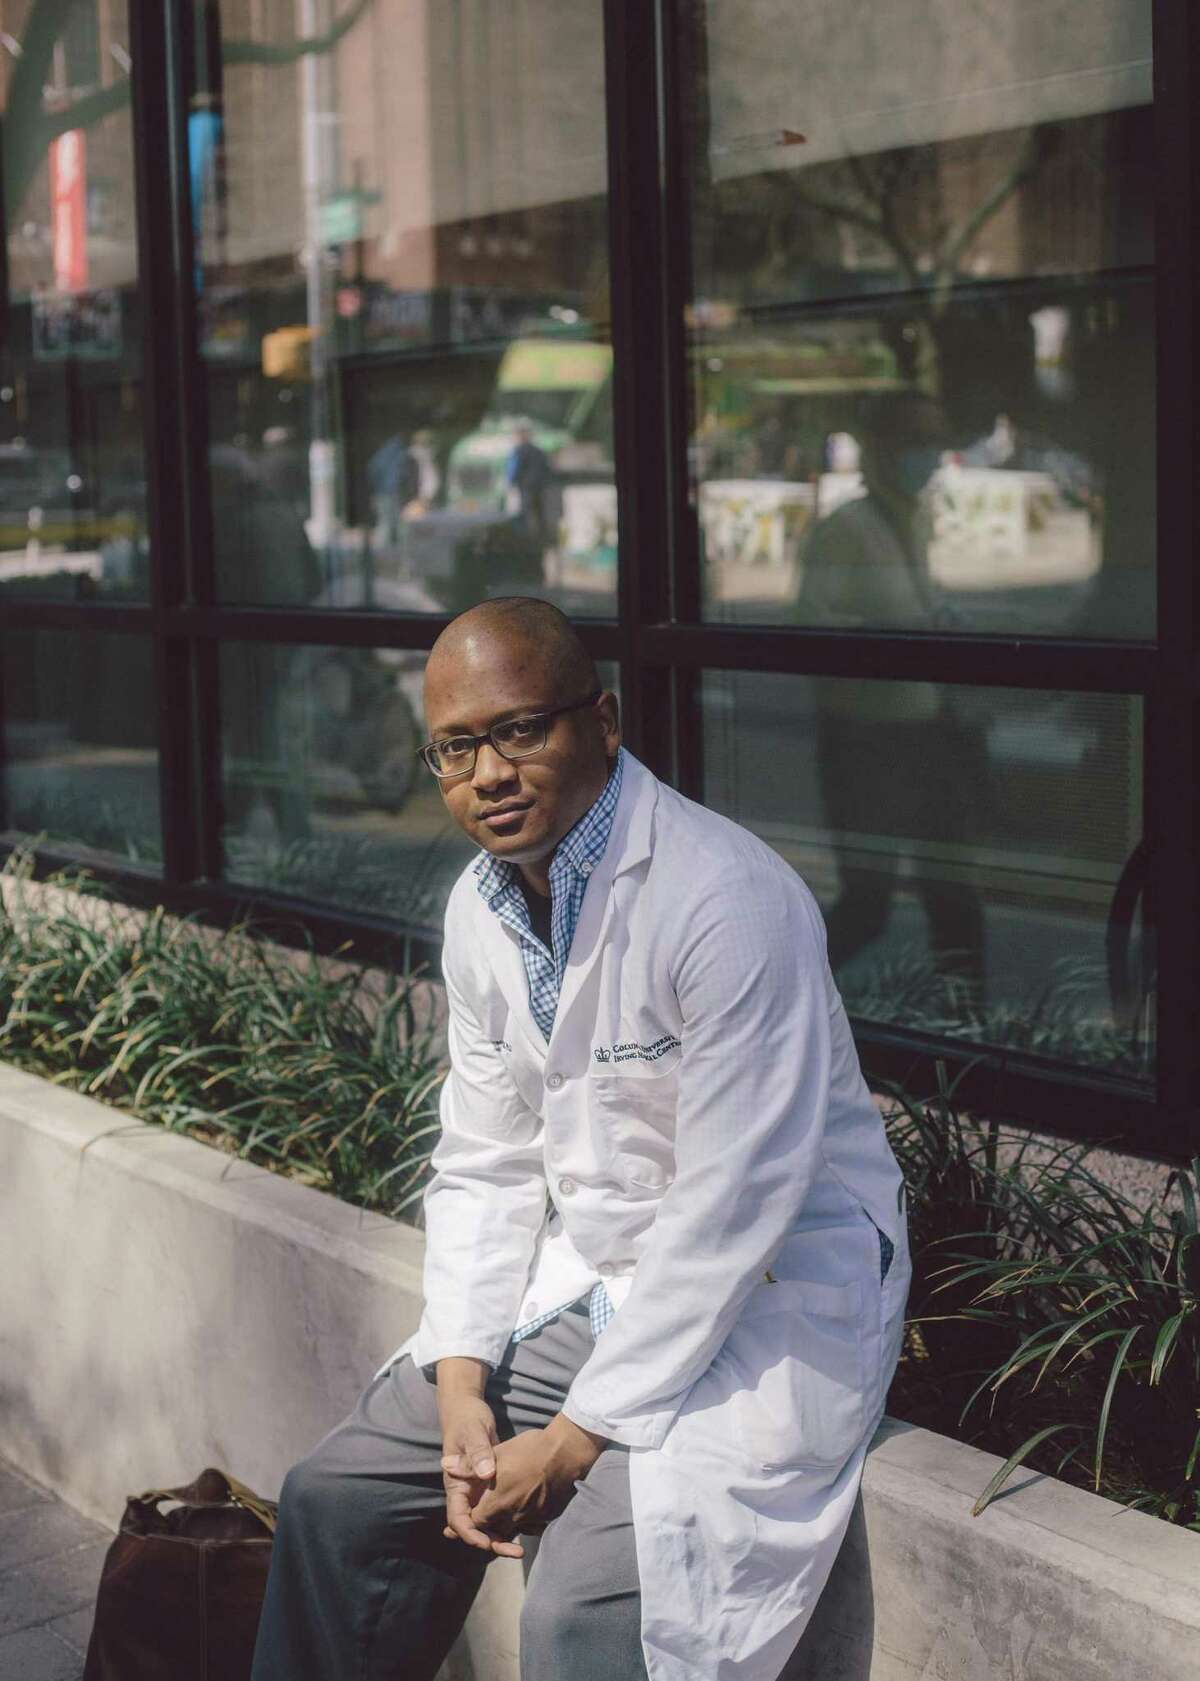 Dr. Raymond Givens, a cardiologist at Columbia University in New York, on April 7, 2021, noted that 93 percent of JAMA’s editorial leaders are white. An editor’s departure at JAMA is bringing calls for a sharper focus on racism and its consequences. (Nathan Bajar/The New York Times)